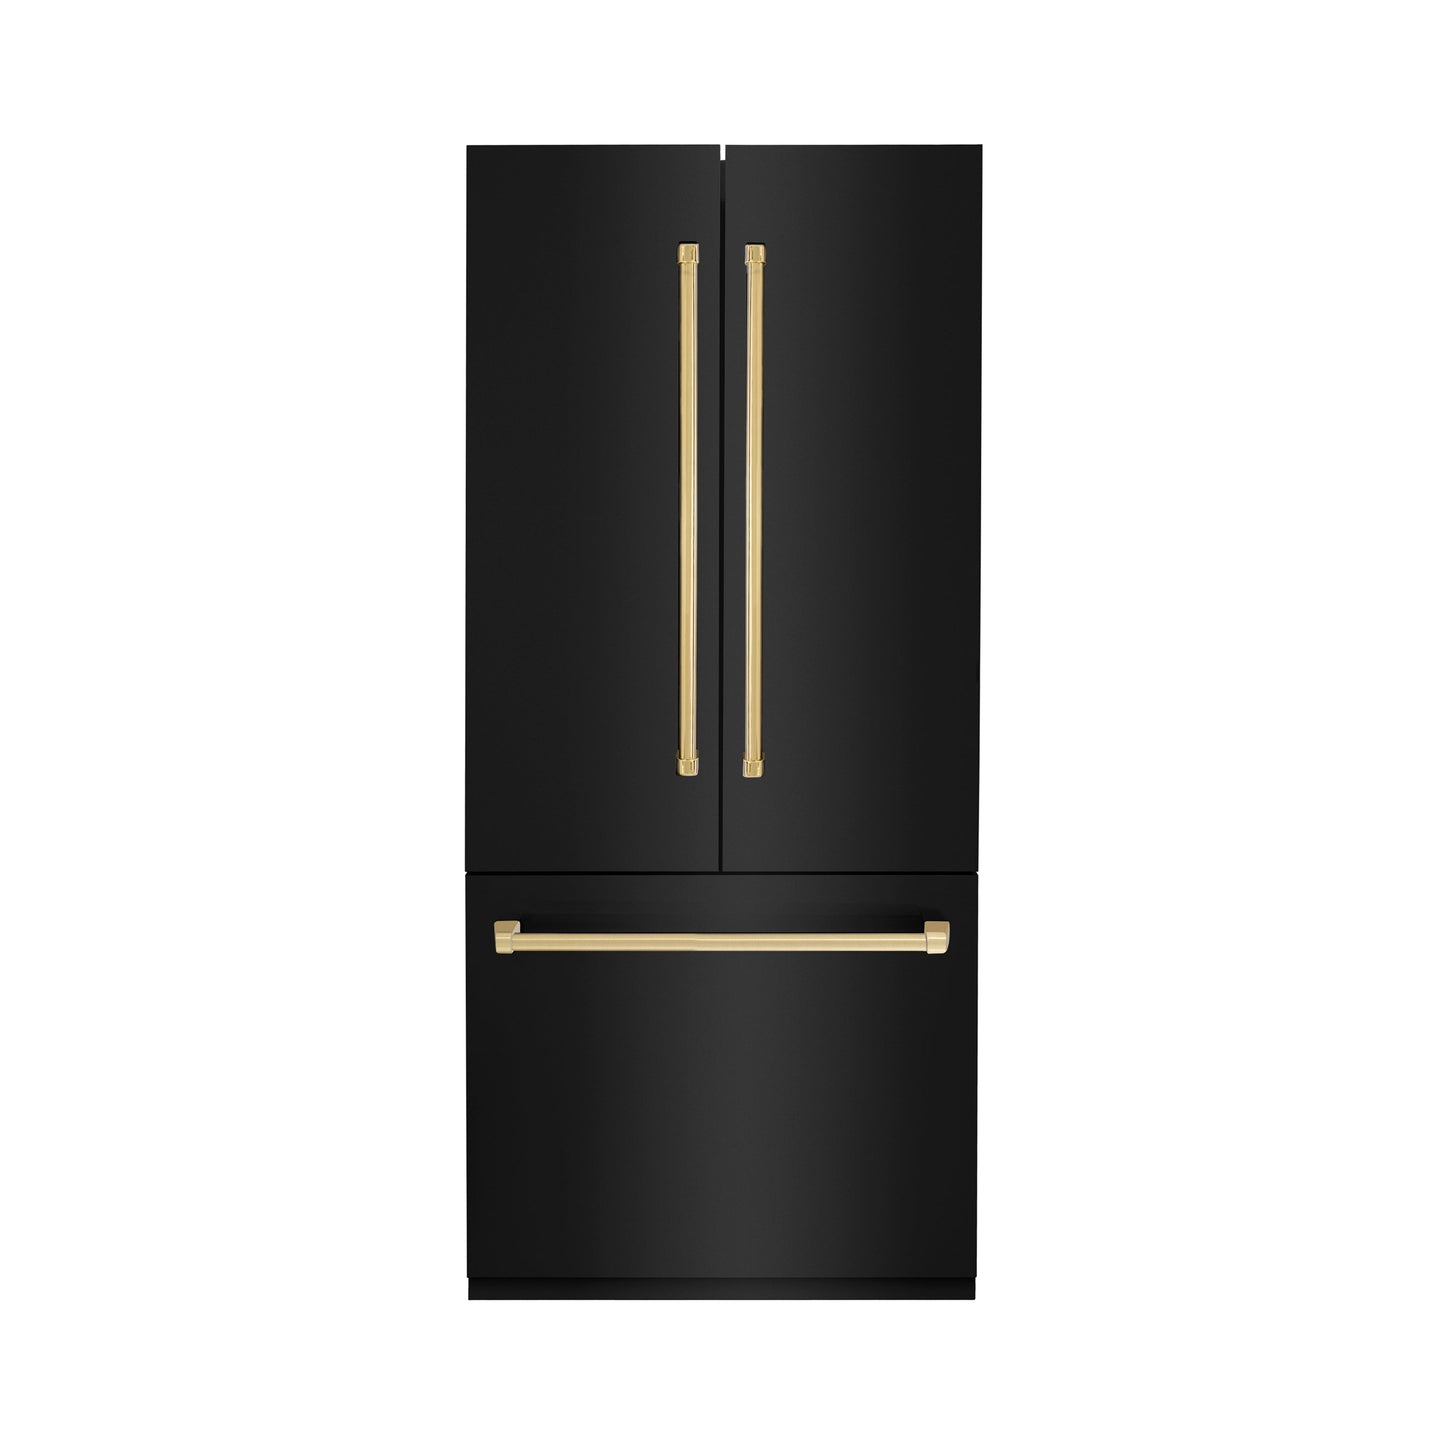 ZLINE 36" Autograph 19.6 cu. ft. Built-in Refrigerator with Internal Water and Ice Dispenser in Black Stainless Steel with Gold Accents, RBIVZ-BS-36-G